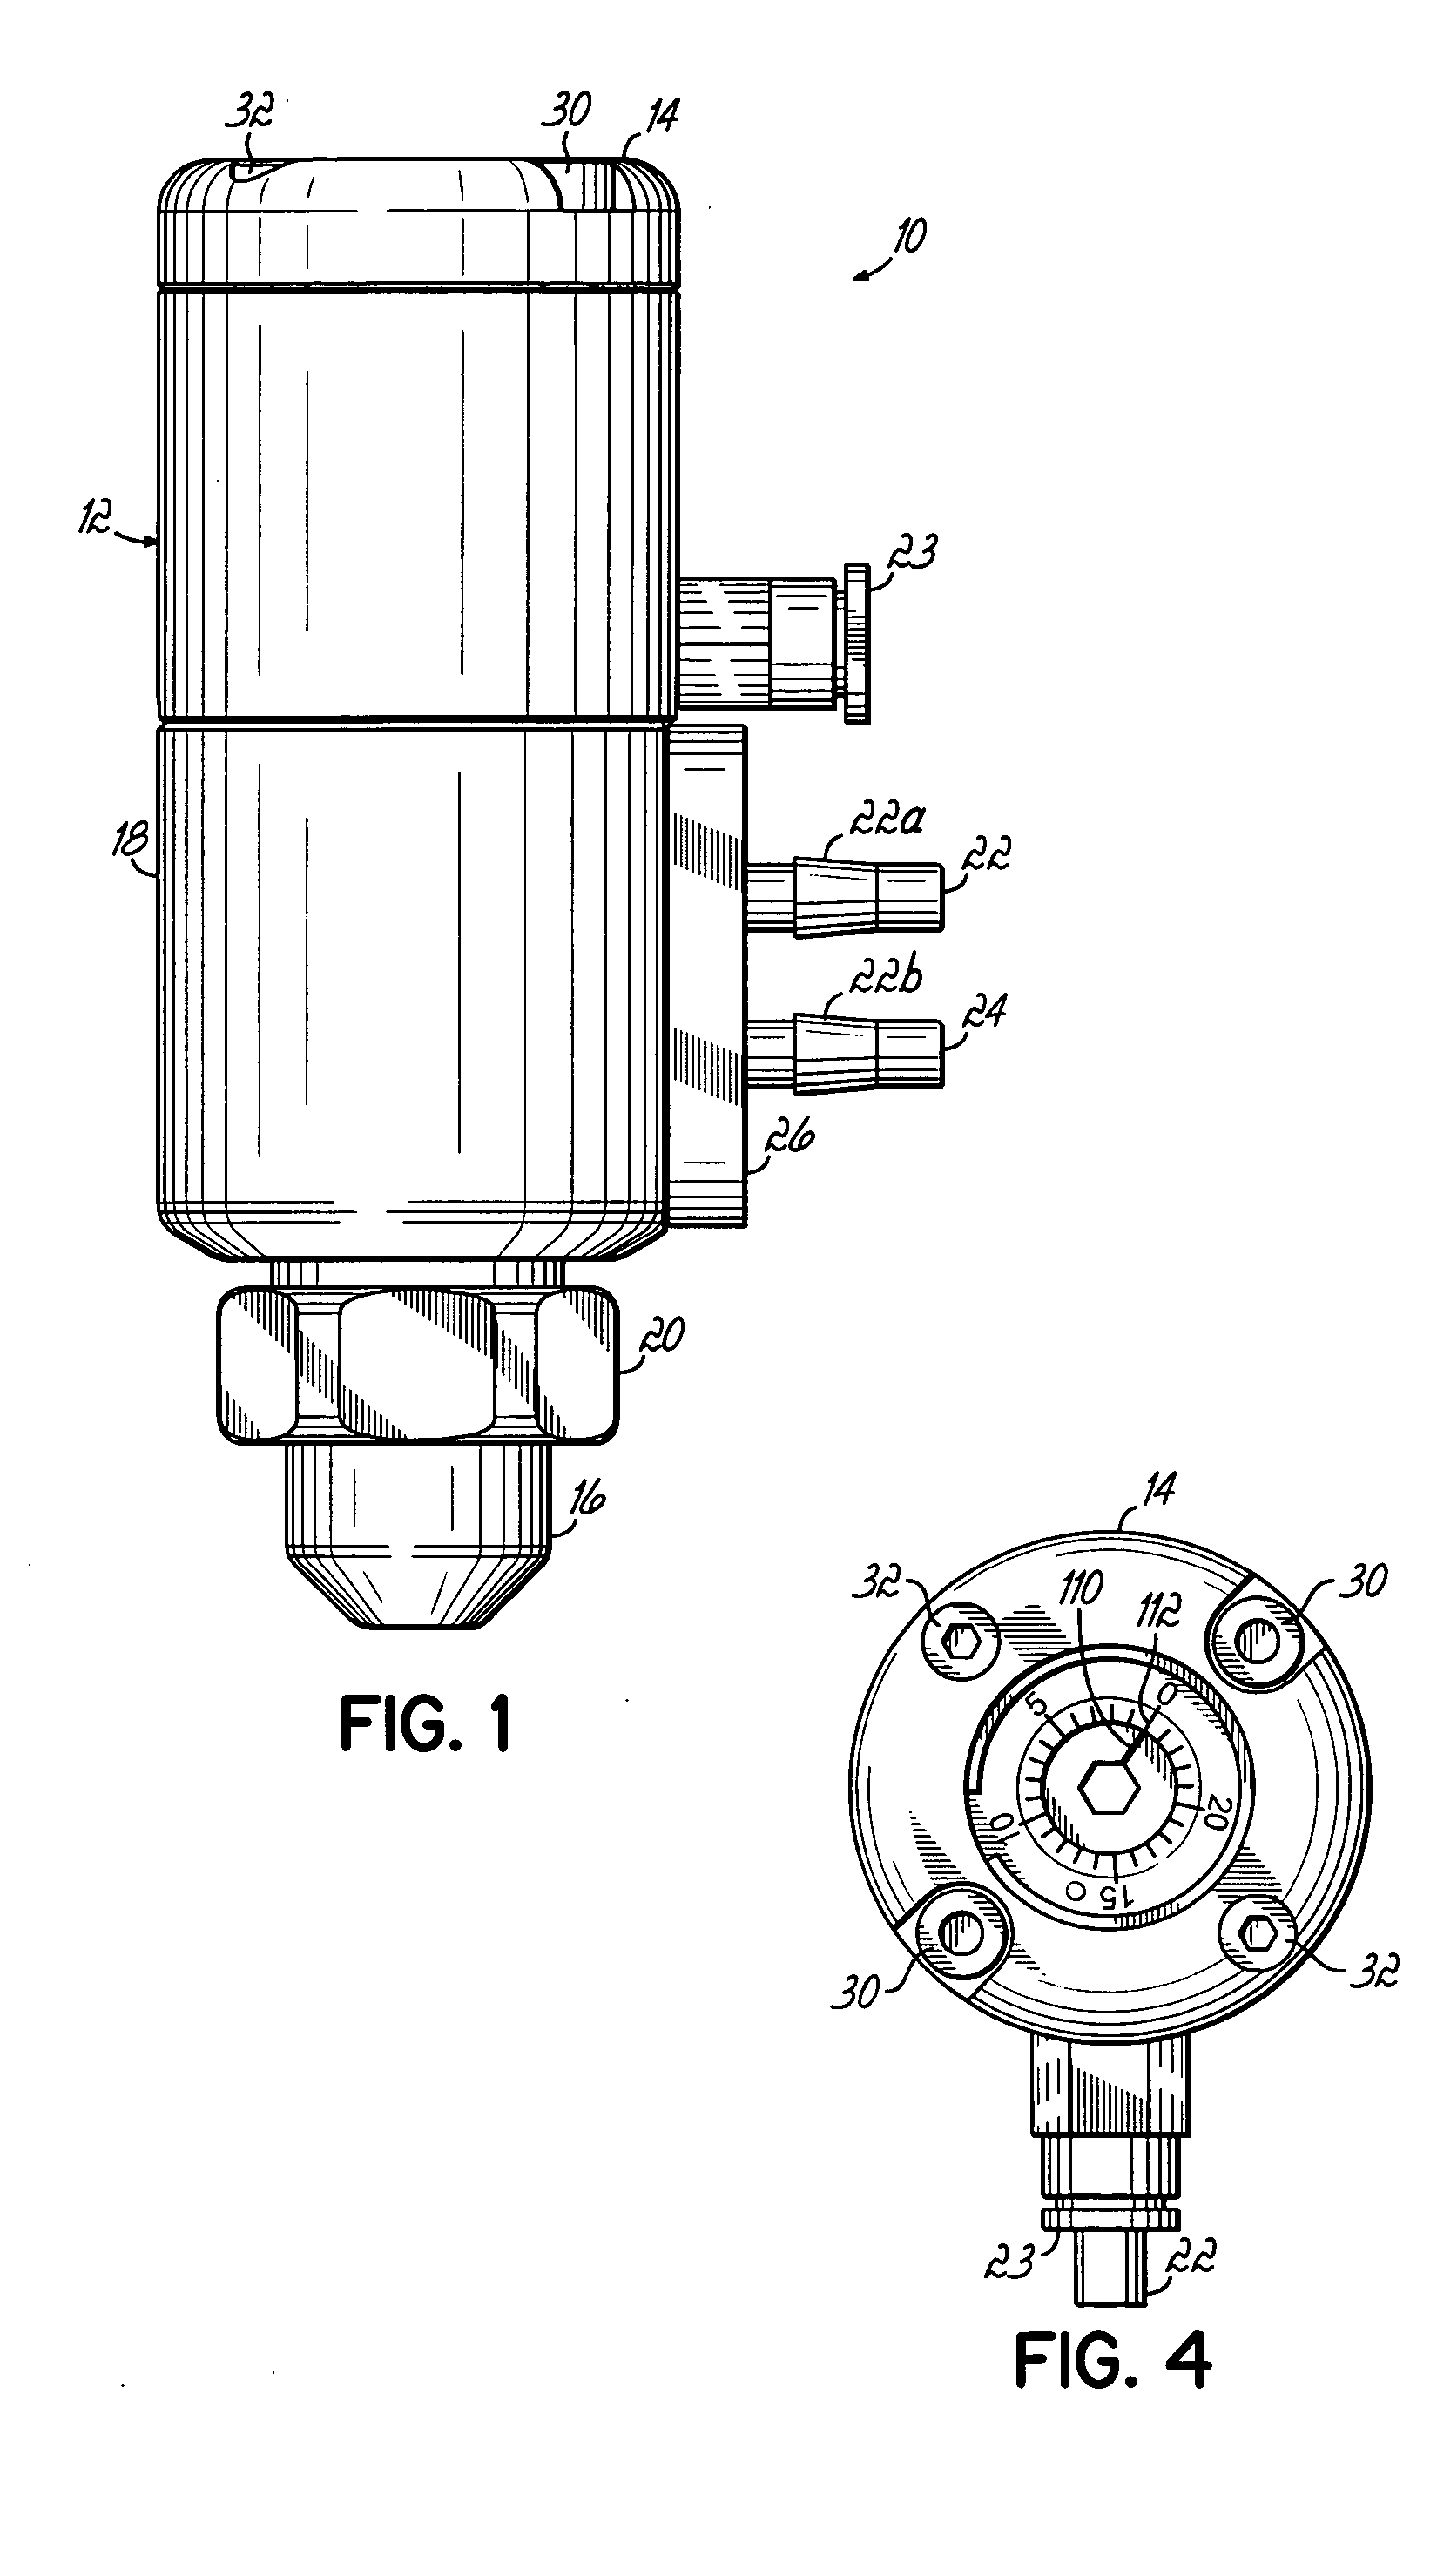 Liquid dispensing valve and method with improved stroke length calibration and fluid fittings